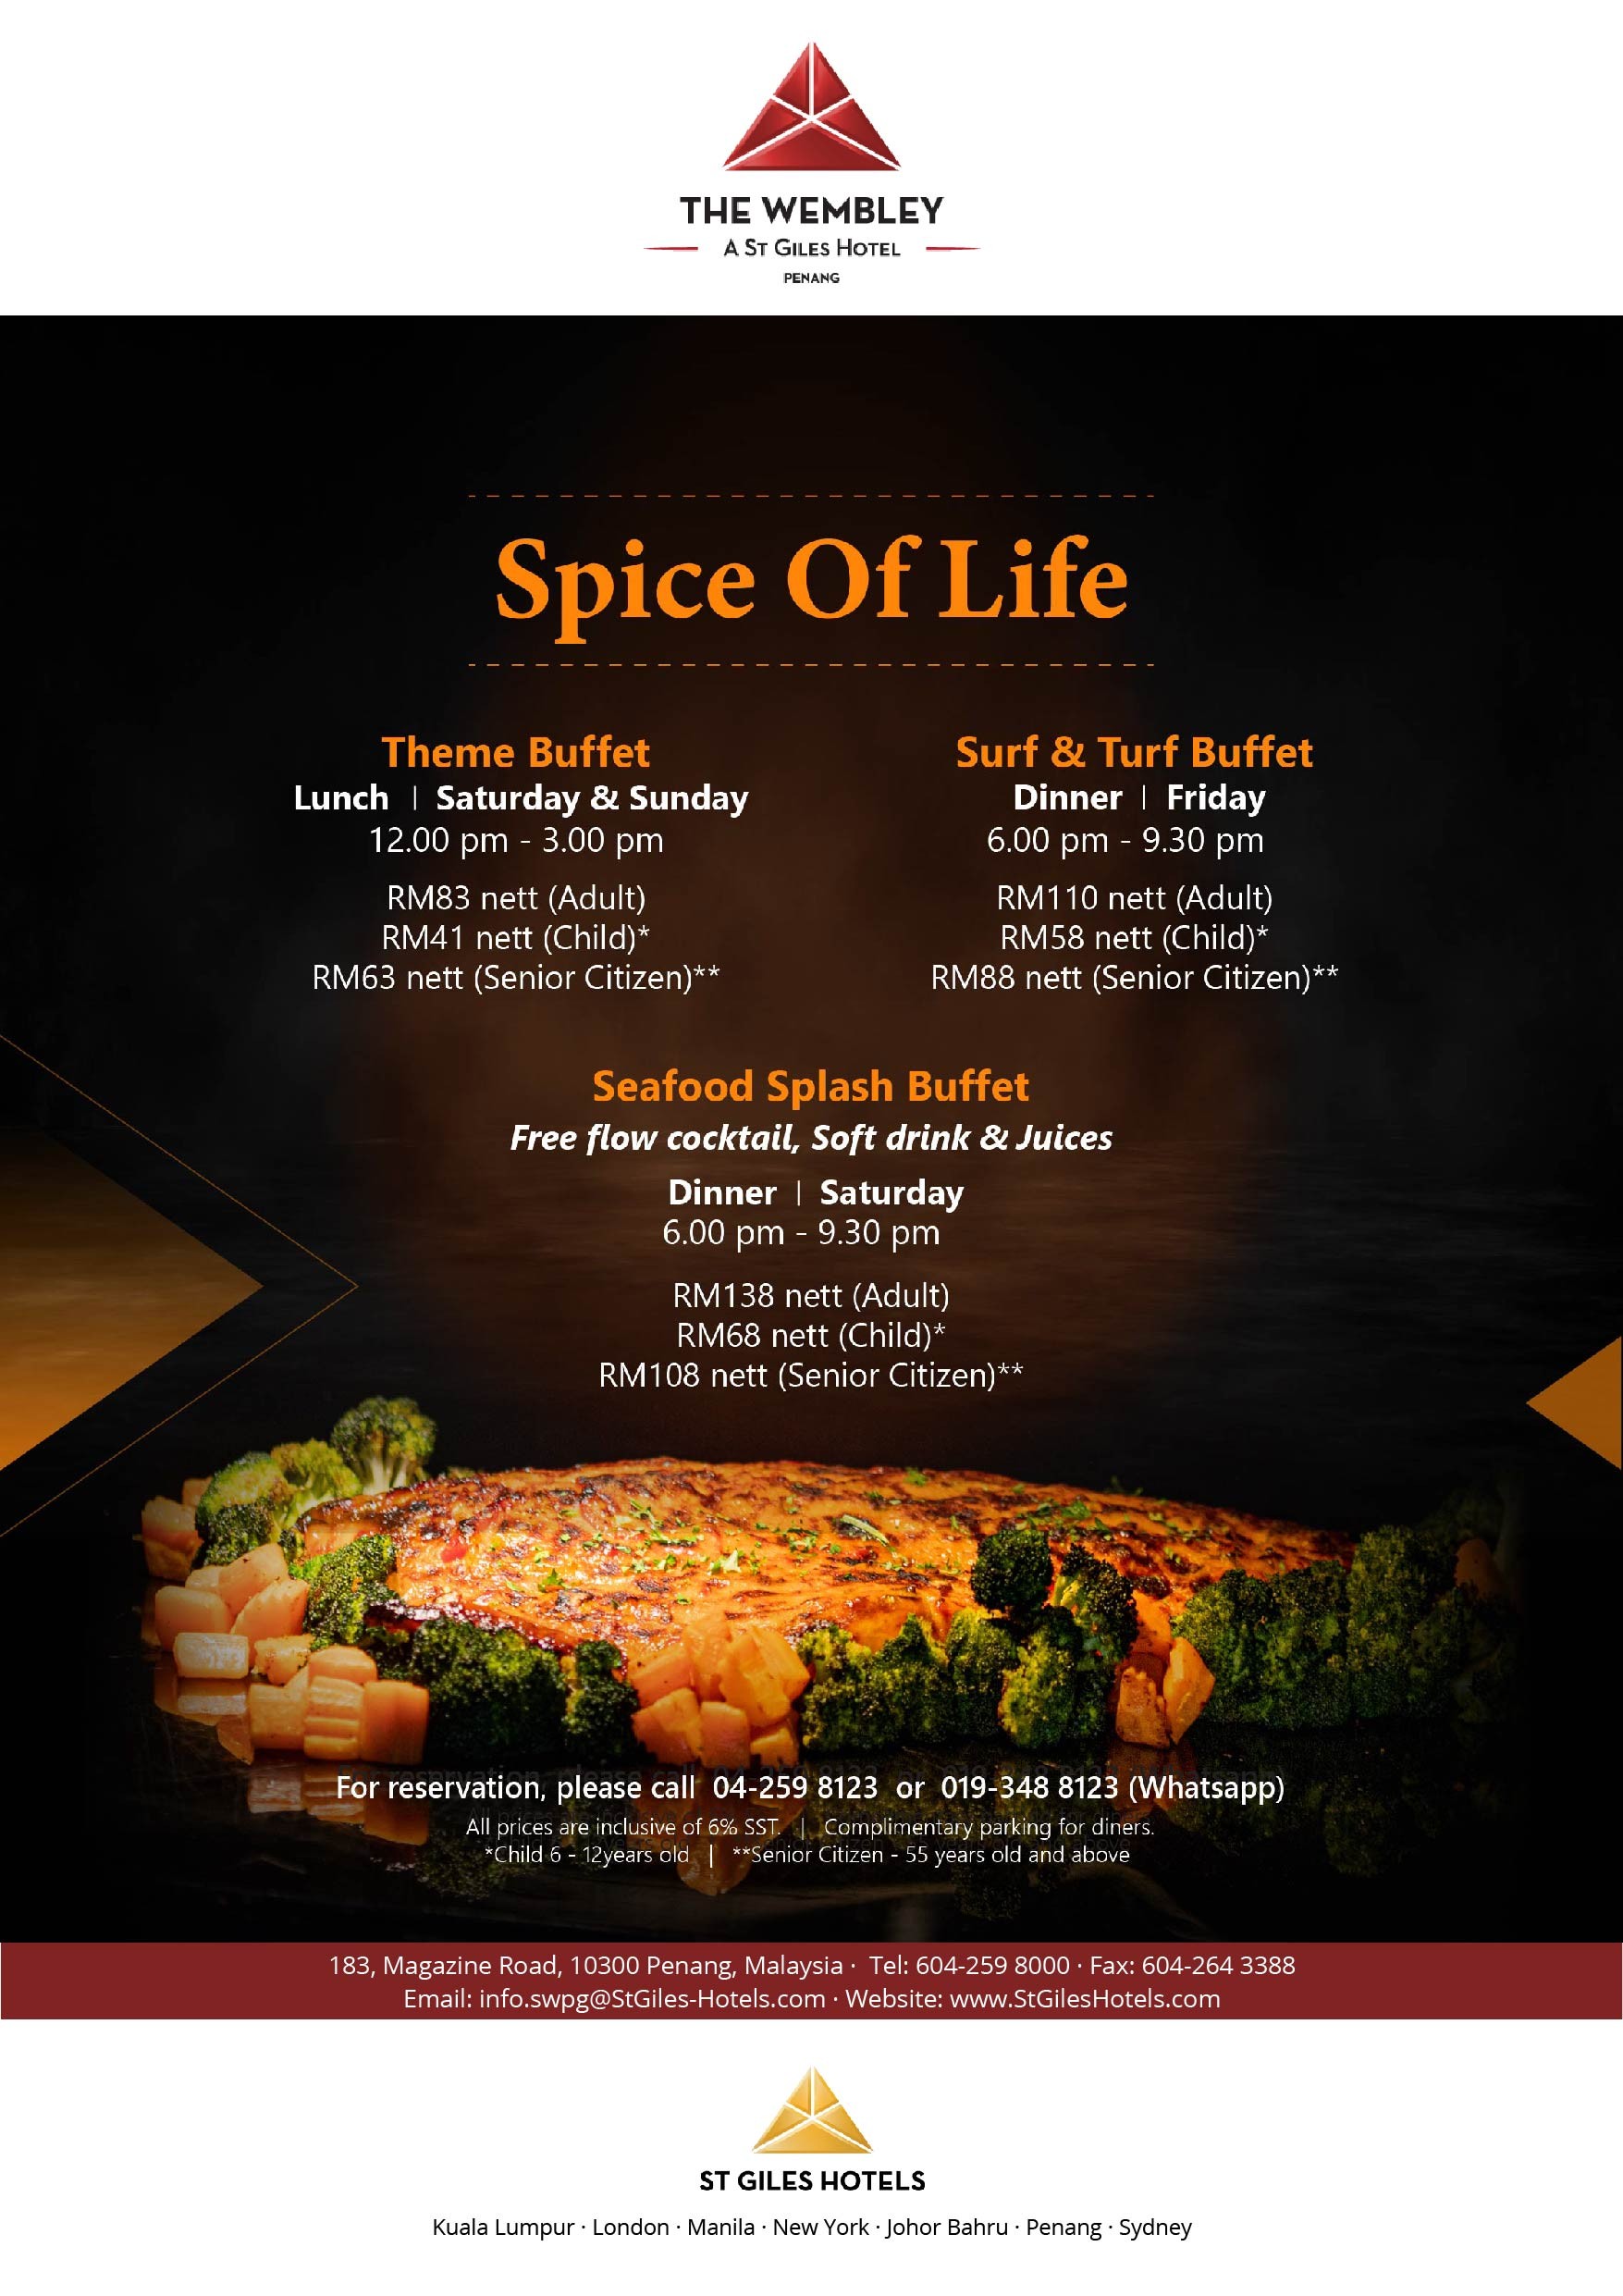 Spice Of Life by The Wembley